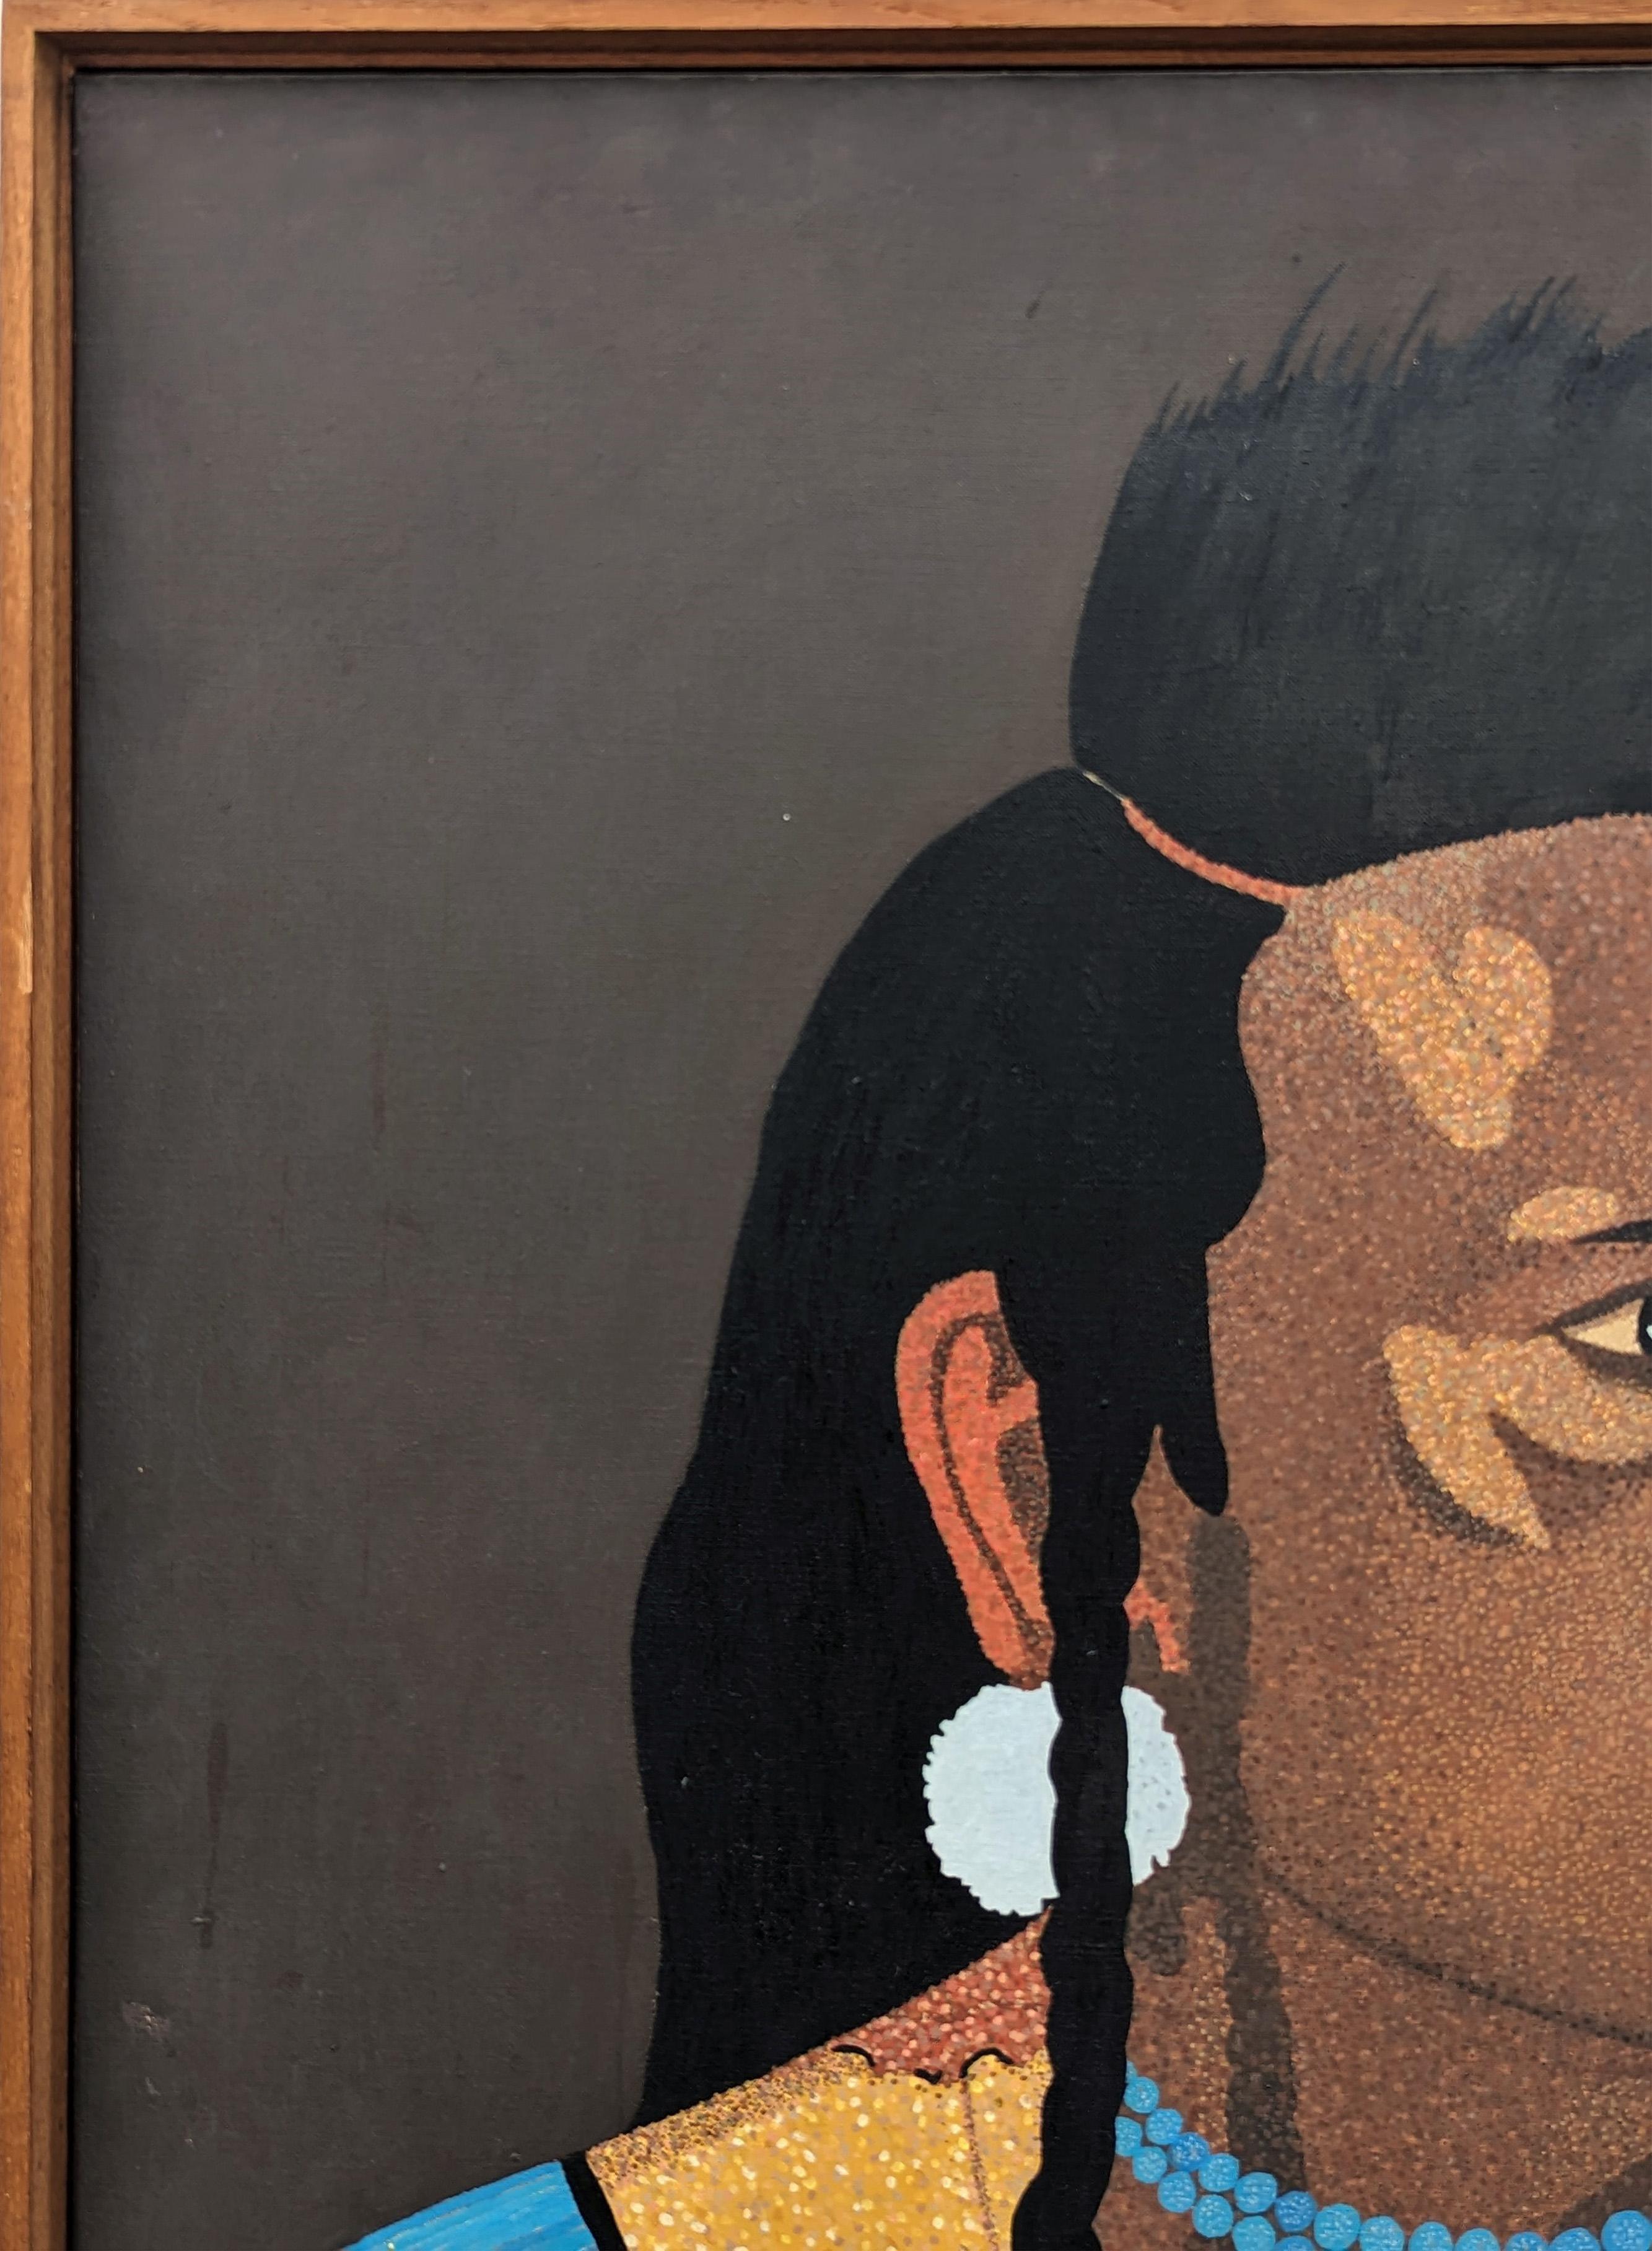 Modern portrait painting of a Native American figure by Texas born artist Clark Fox. The work features an intricate depiction of the figure using pointillism, the practice of applying small strokes or dots of color to a surface so that from a